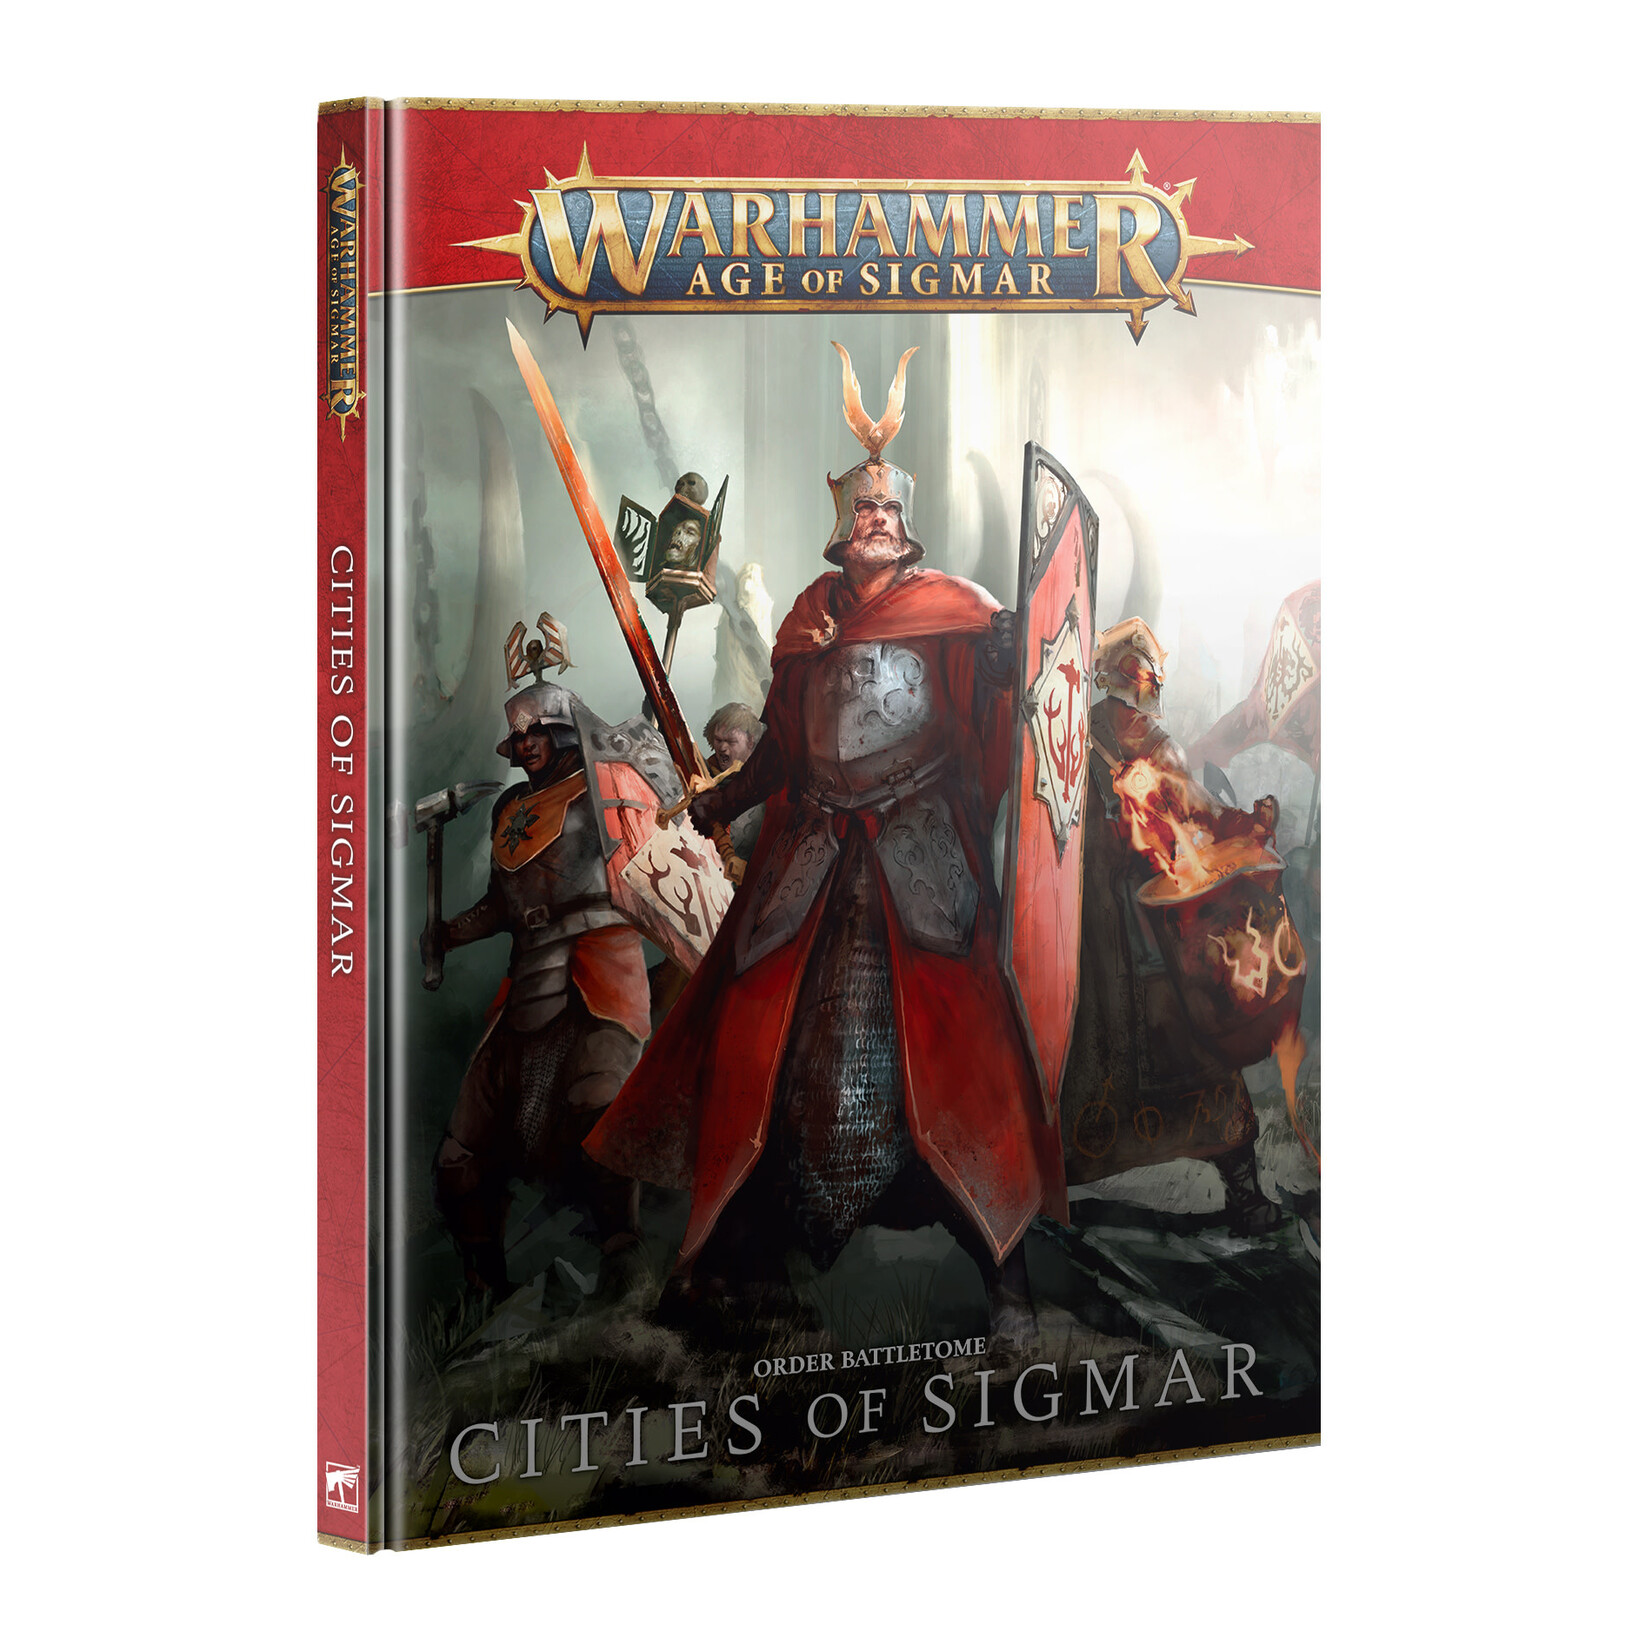 Battletome Cities of Sigmar (AOS)